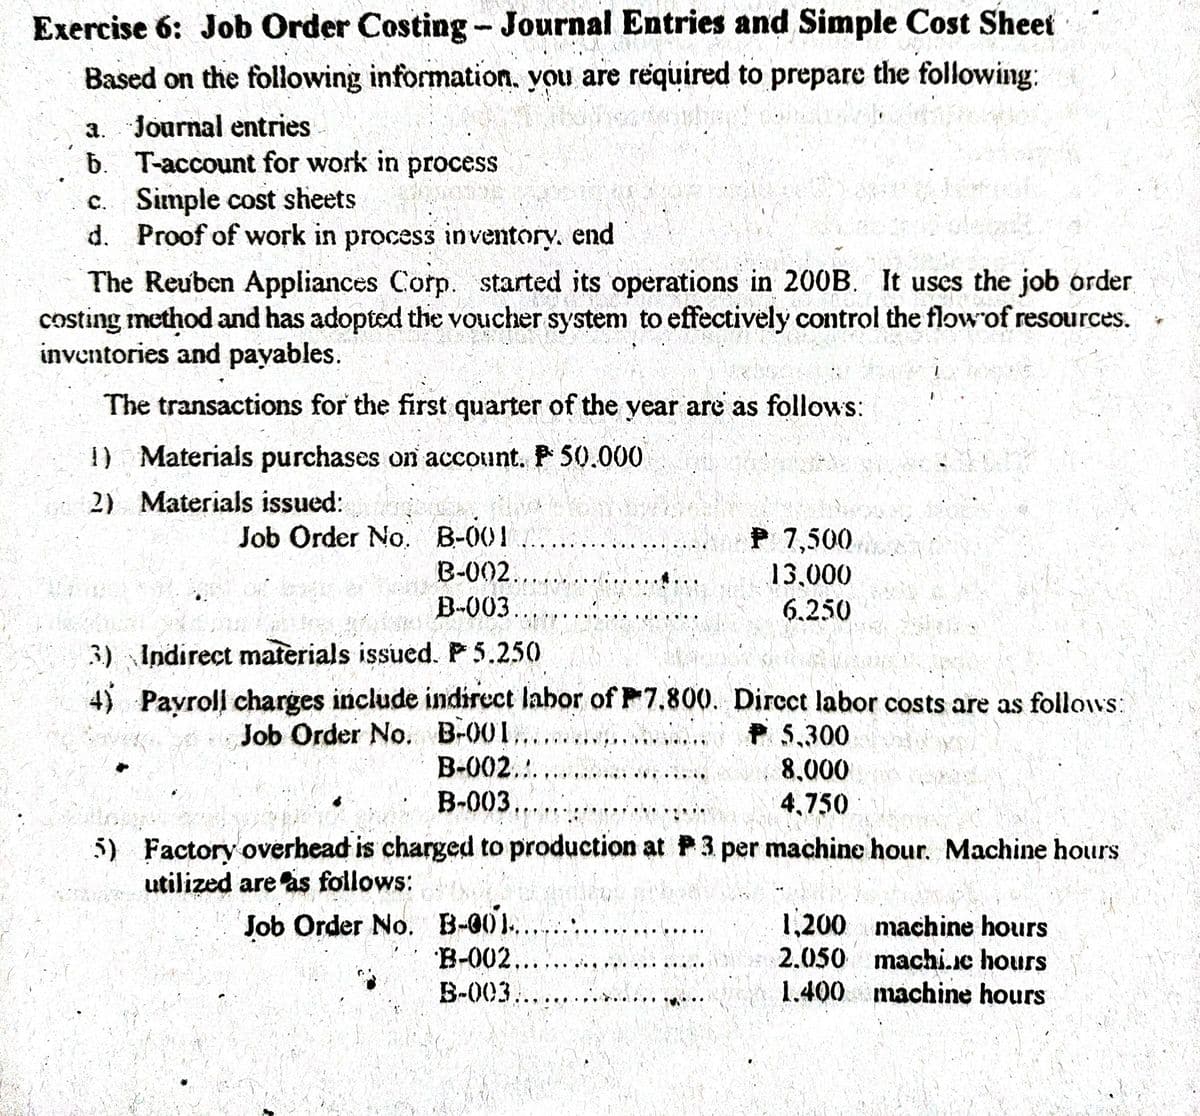 Exercise 6: Job Order Costing- Journal Entries and Simple Cost Sheet
Based on the following information. you are required to prepare the following:
a. Journal entries-
b. T-account for work in process
c. Simple cost sheets
d. Proof of work in process inventory. end
The Reuben Appliances Corp. started its operations in 200B. It uses the job order
costing method and has adopted the voucher system to effectively control the flowof resources.
inventories and payables.
The transactions for the first quarter of the year are as follows:
1) Materials purchases on account. P 50.000
2) Materials issued:
Job Order No. B-001
B-002.,
B-003.
P 7,500
13,000
6.250
3) Indirect materials issucd. P 5.250
4) Payroll charges include indirect labor of F7.800. Dircct labor costs are as follows:
Job Order No. B-001..
B-002..
P 5,300
8,000
B-003...
4,750
5) Factory overbead is charged to production at P3 per machine hour. Machine hours
utilized are as follows:
Job Order No. B-001...
B-002...
1,200 machine hours
2.050 machi.c hours
1.400 machine hours
B-003,
